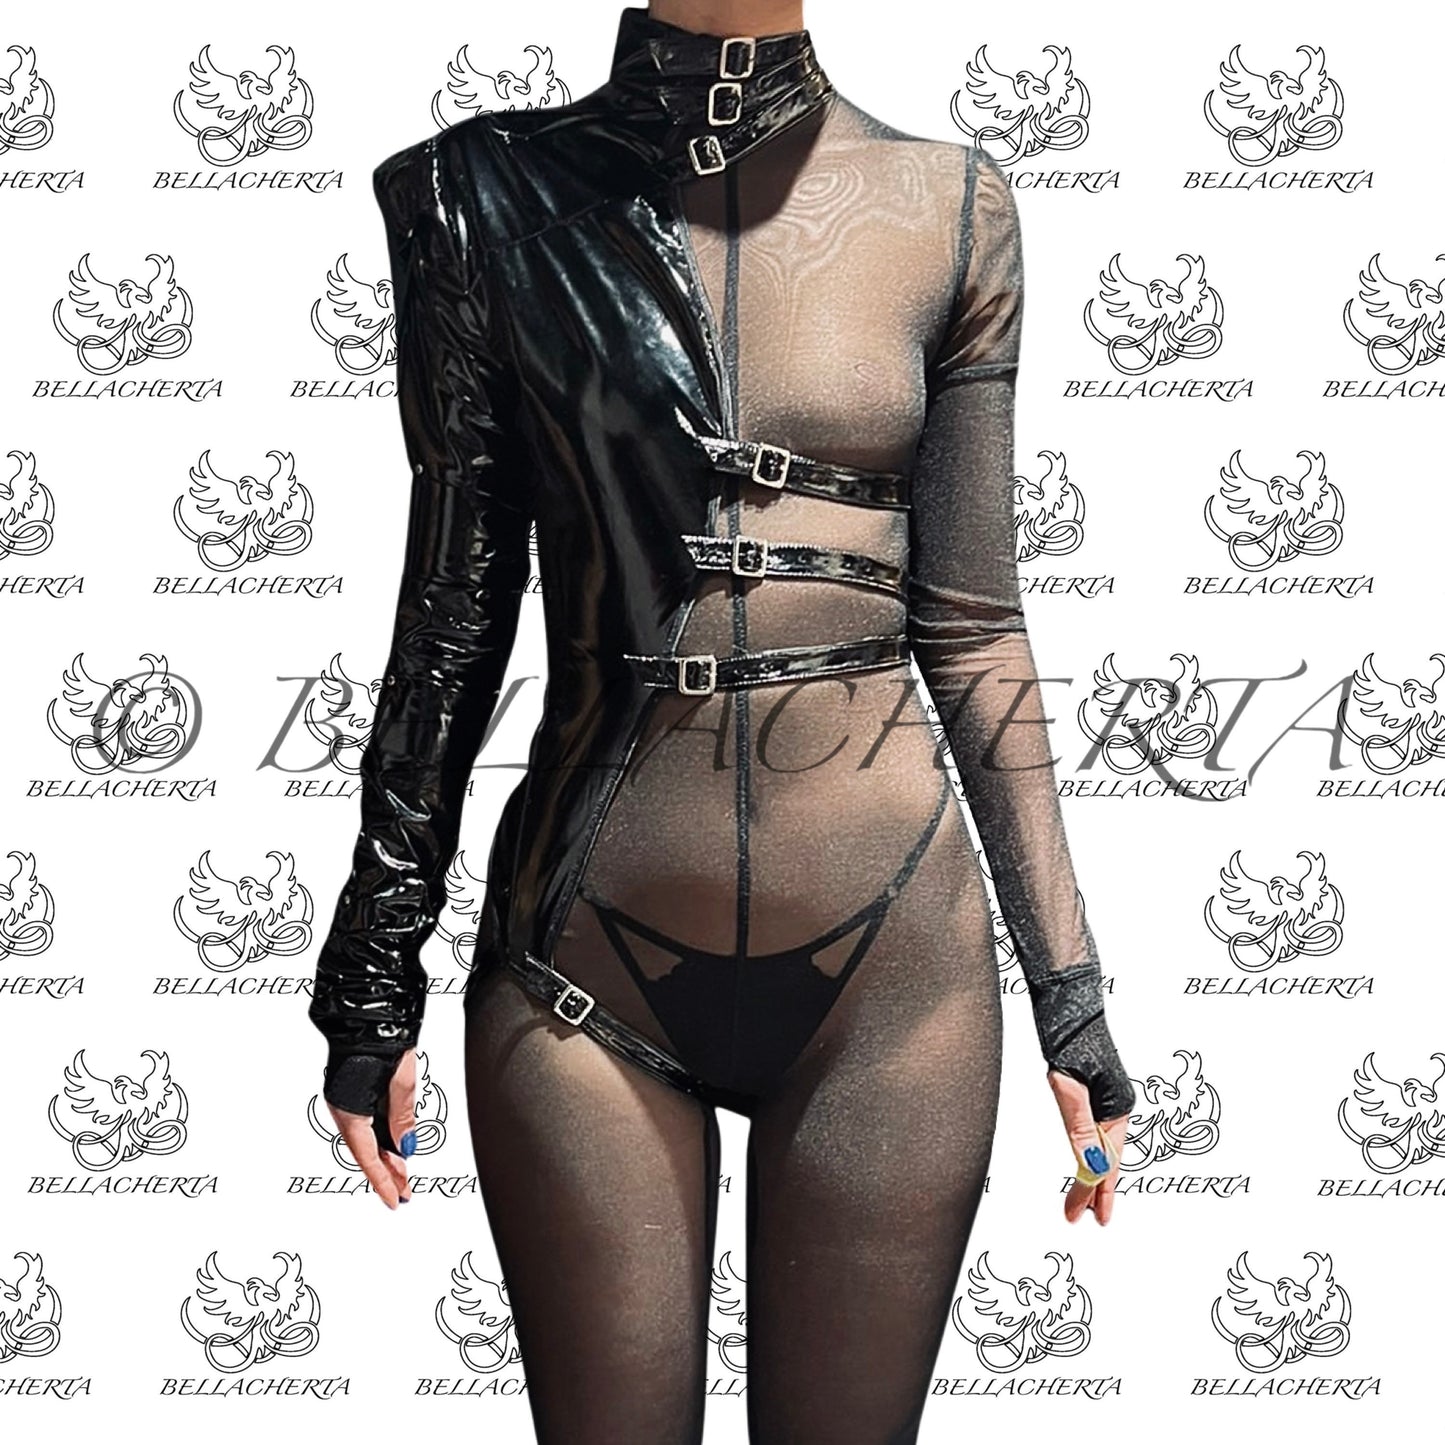 One-sleeve Imitation Leather Strap Bodysuit Only (mesh bodysuit is sold separately)